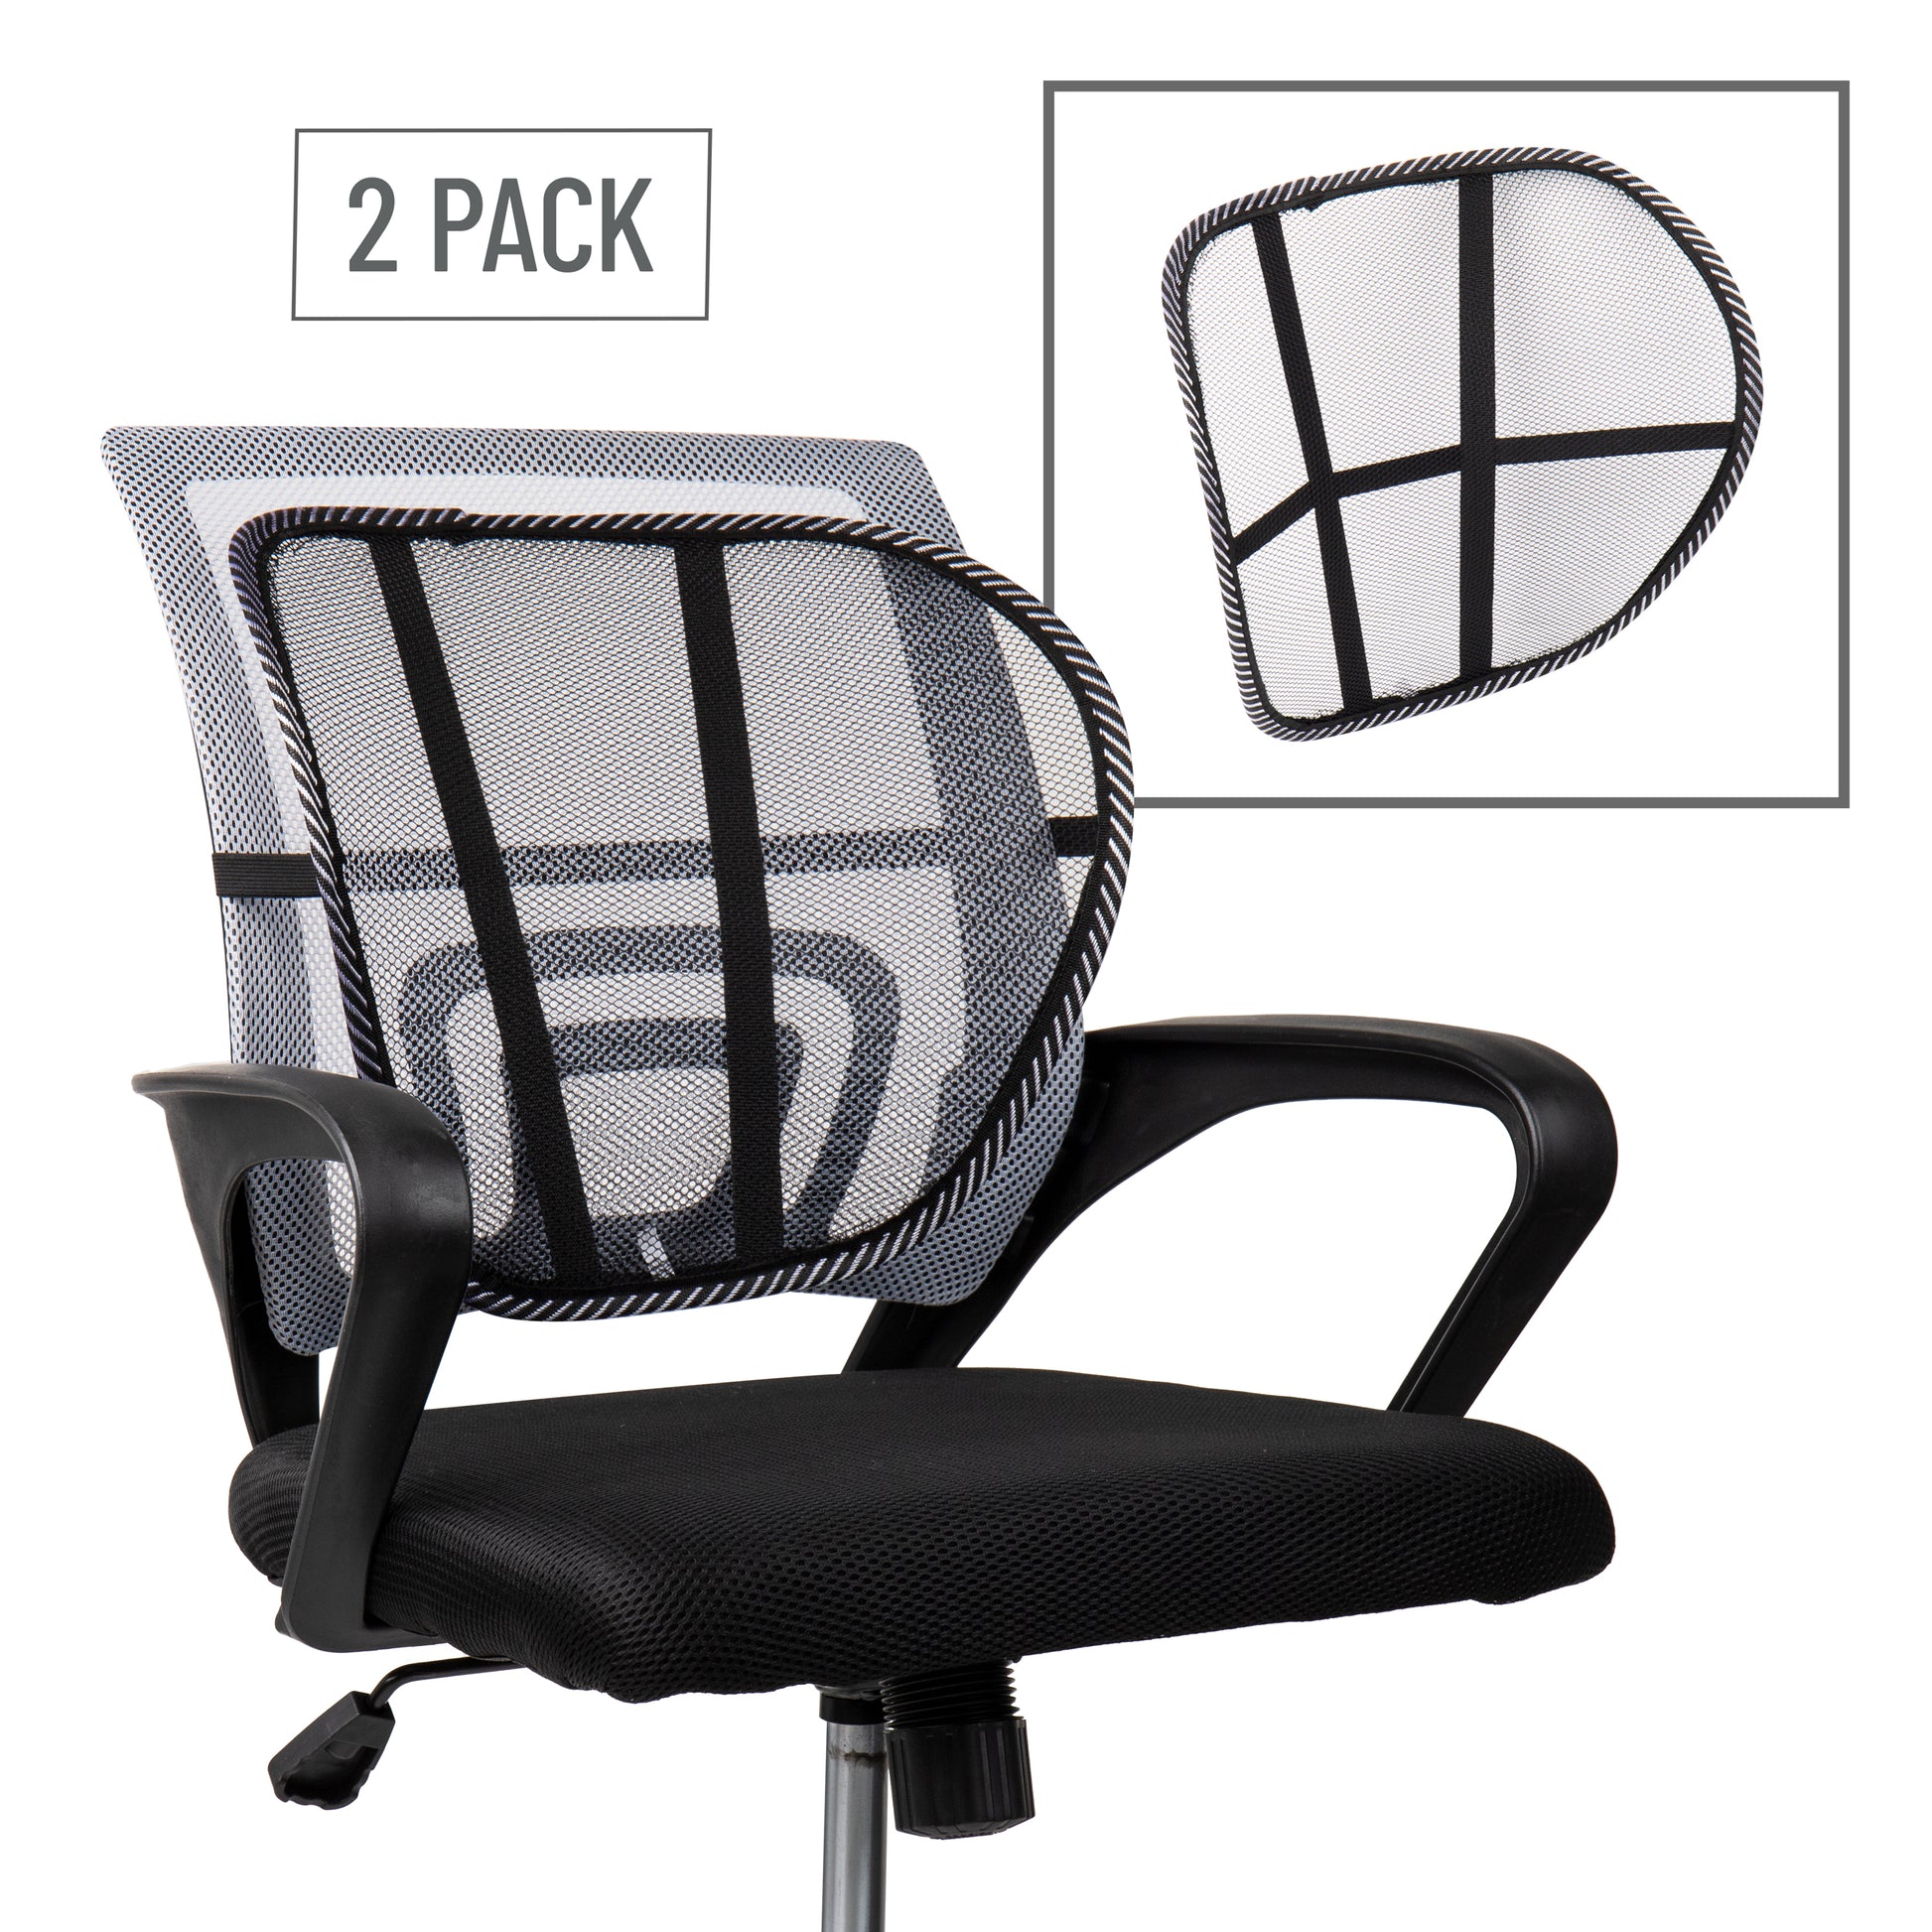 Mesh Back Lumbar Support Car Back Support for Driving Seat Office Home Chair